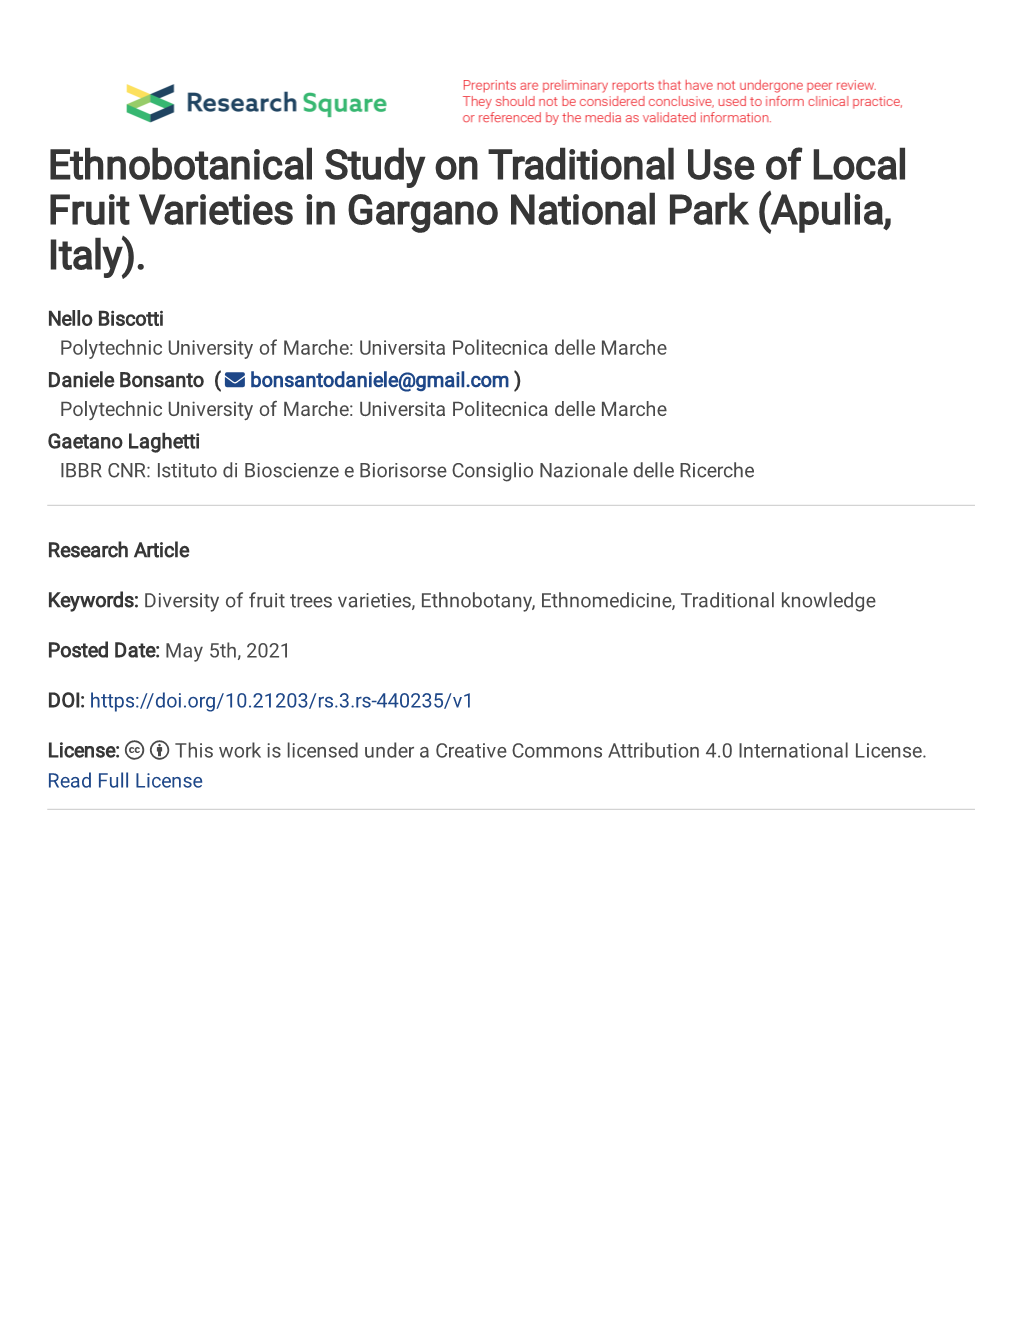 Ethnobotanical Study on Traditional Use of Local Fruit Varieties in Gargano National Park (Apulia, Italy)